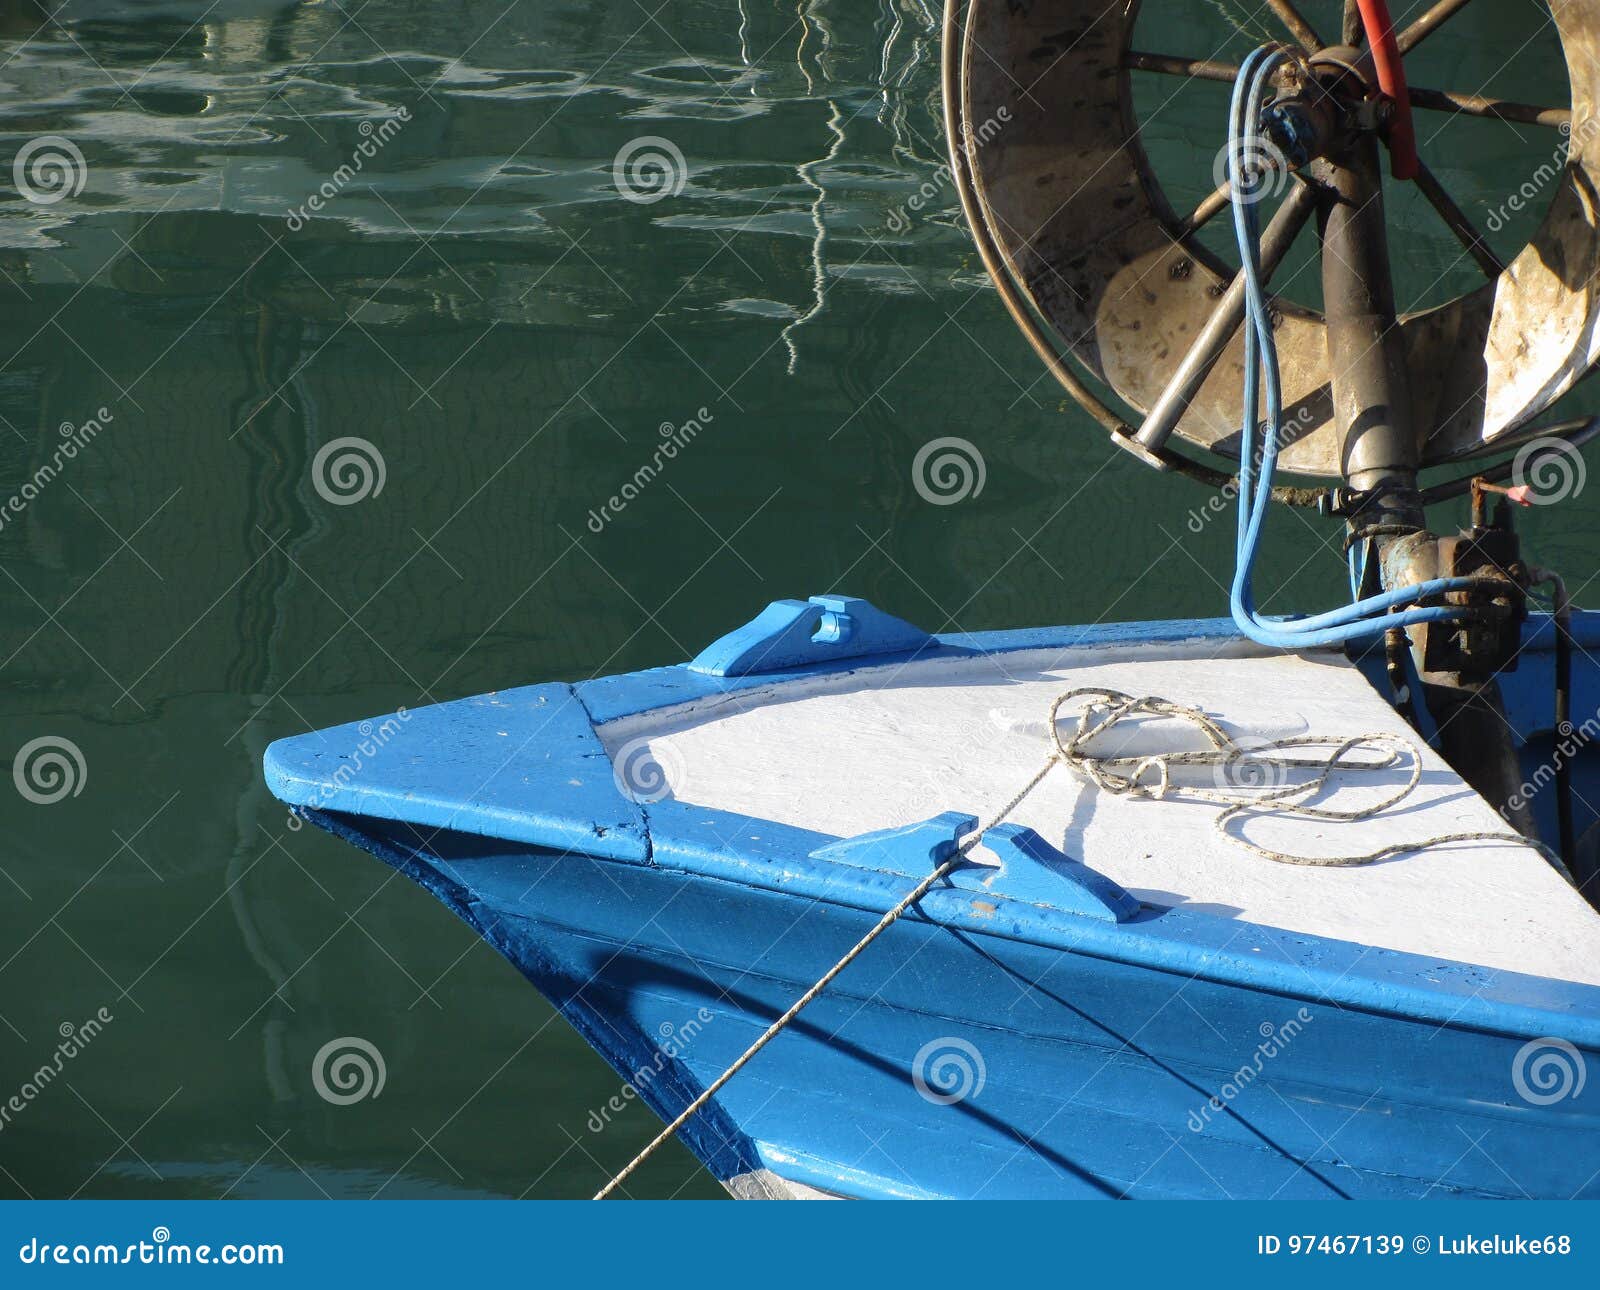 https://thumbs.dreamstime.com/z/prow-wooden-fishing-boat-trawl-winch-deck-fishing-boat-moored-harbor-tuscany-italy-97467139.jpg